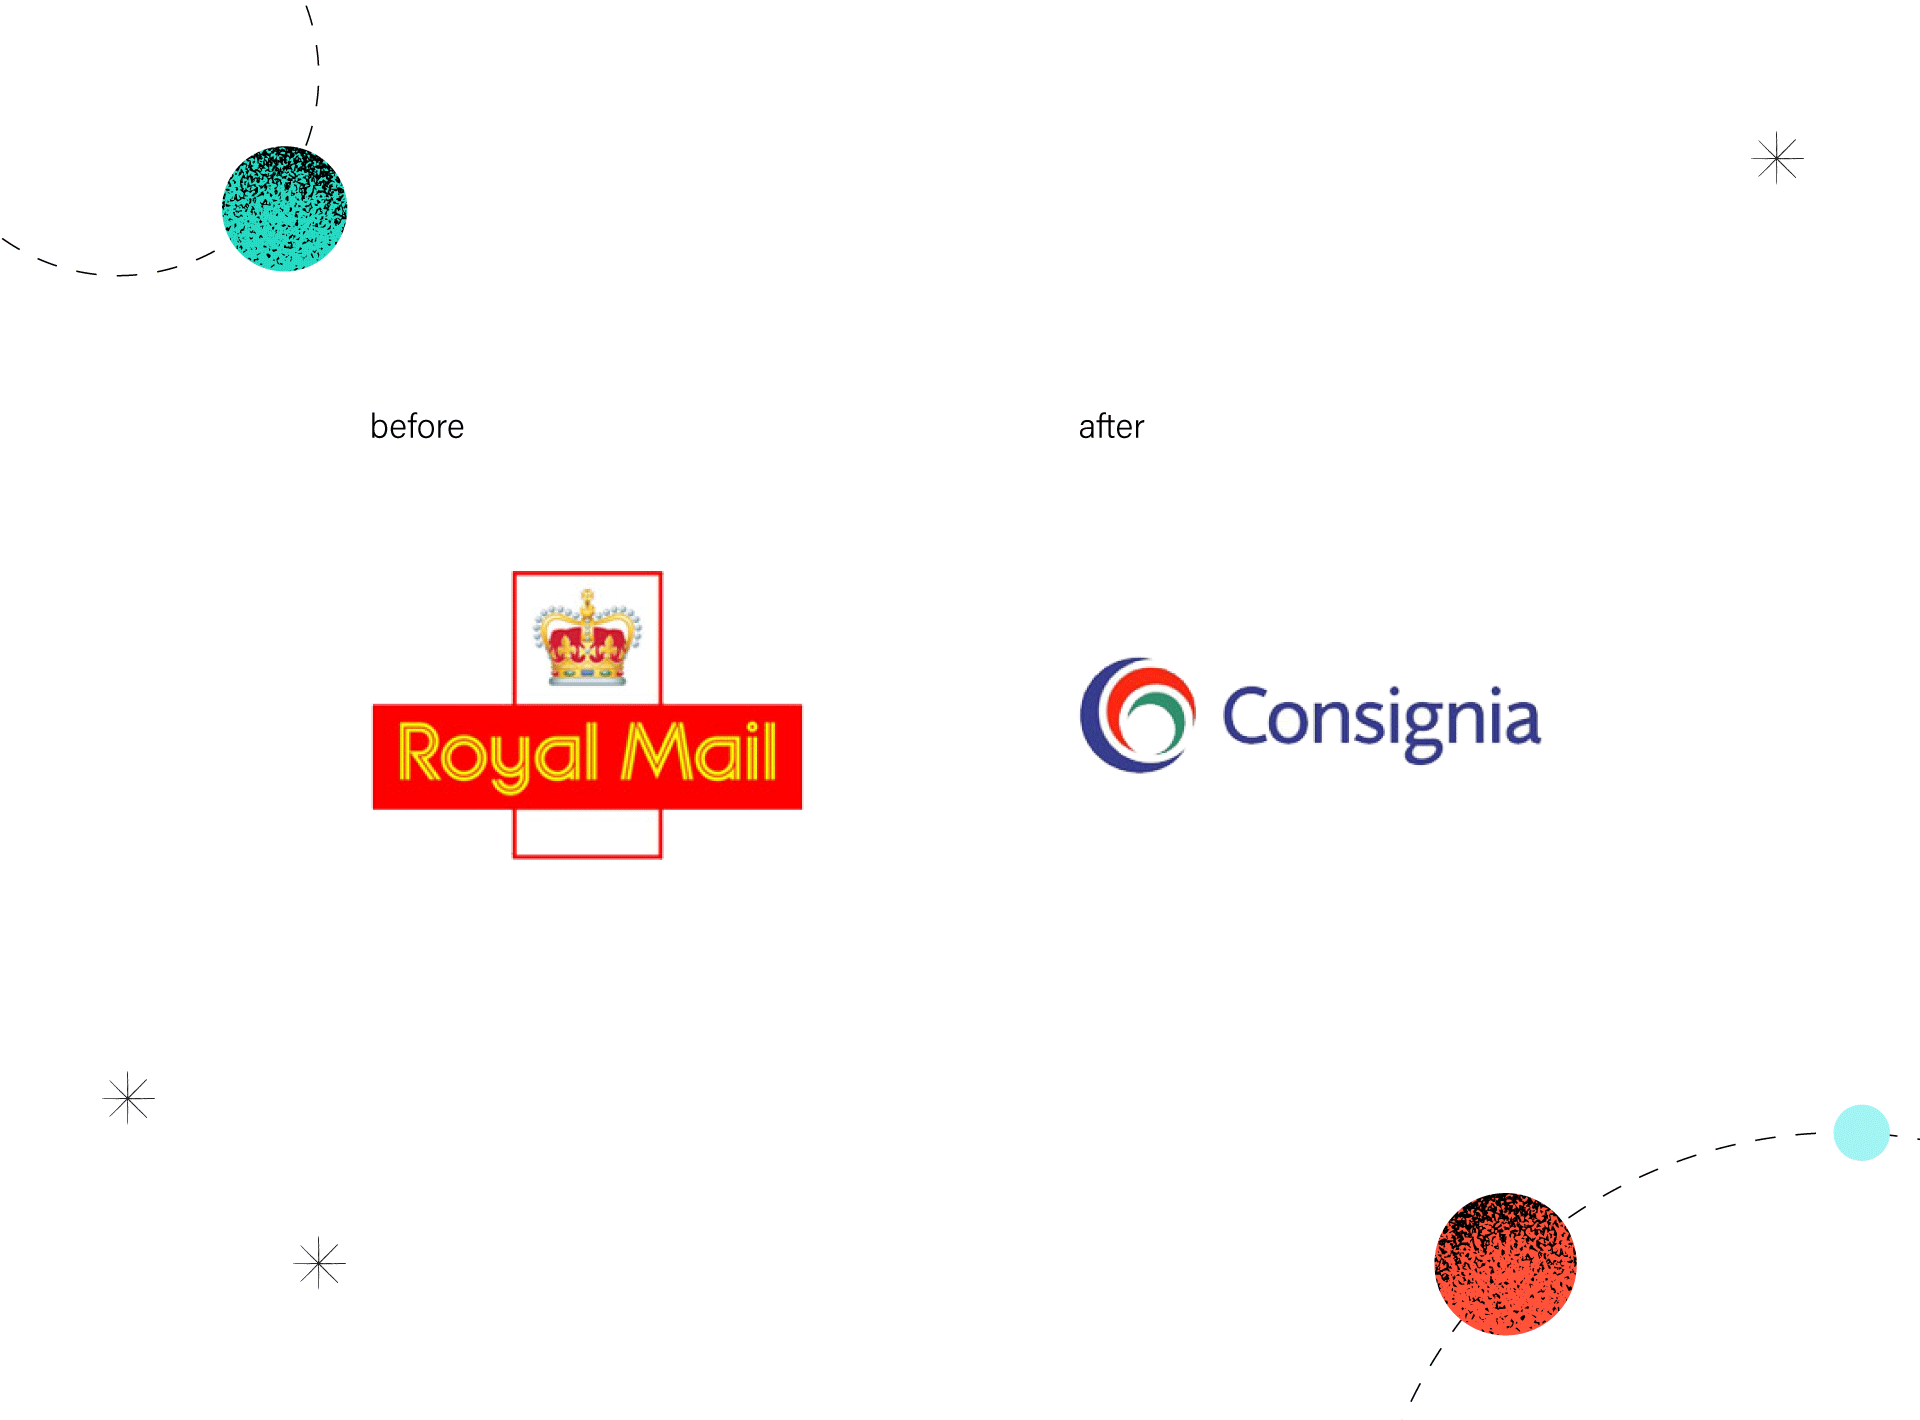 Royal Mail and Consignia logotypes - examples of unsuccessful rebranding